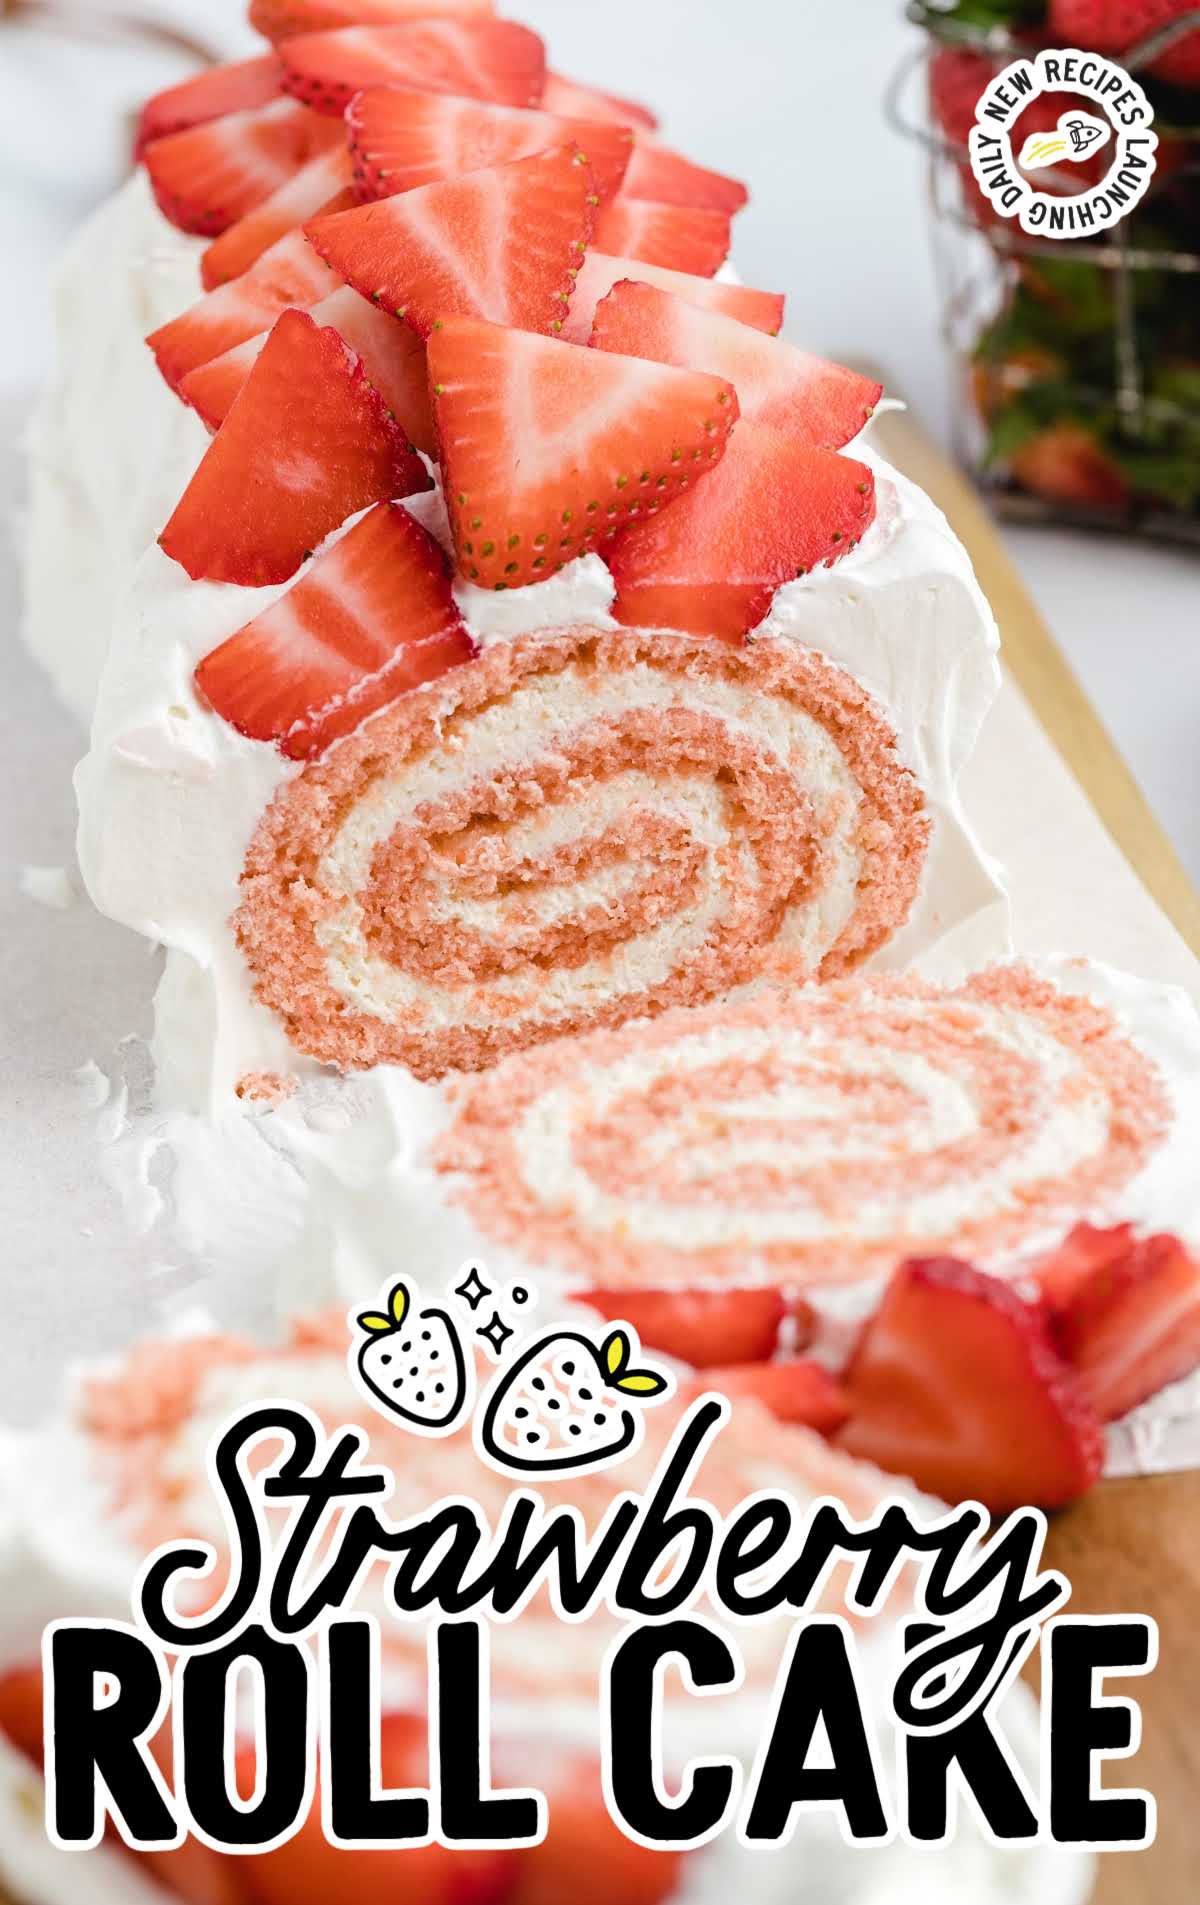 strawberry roll cake garnished with diced strawberries and cut into slices on a wooden board